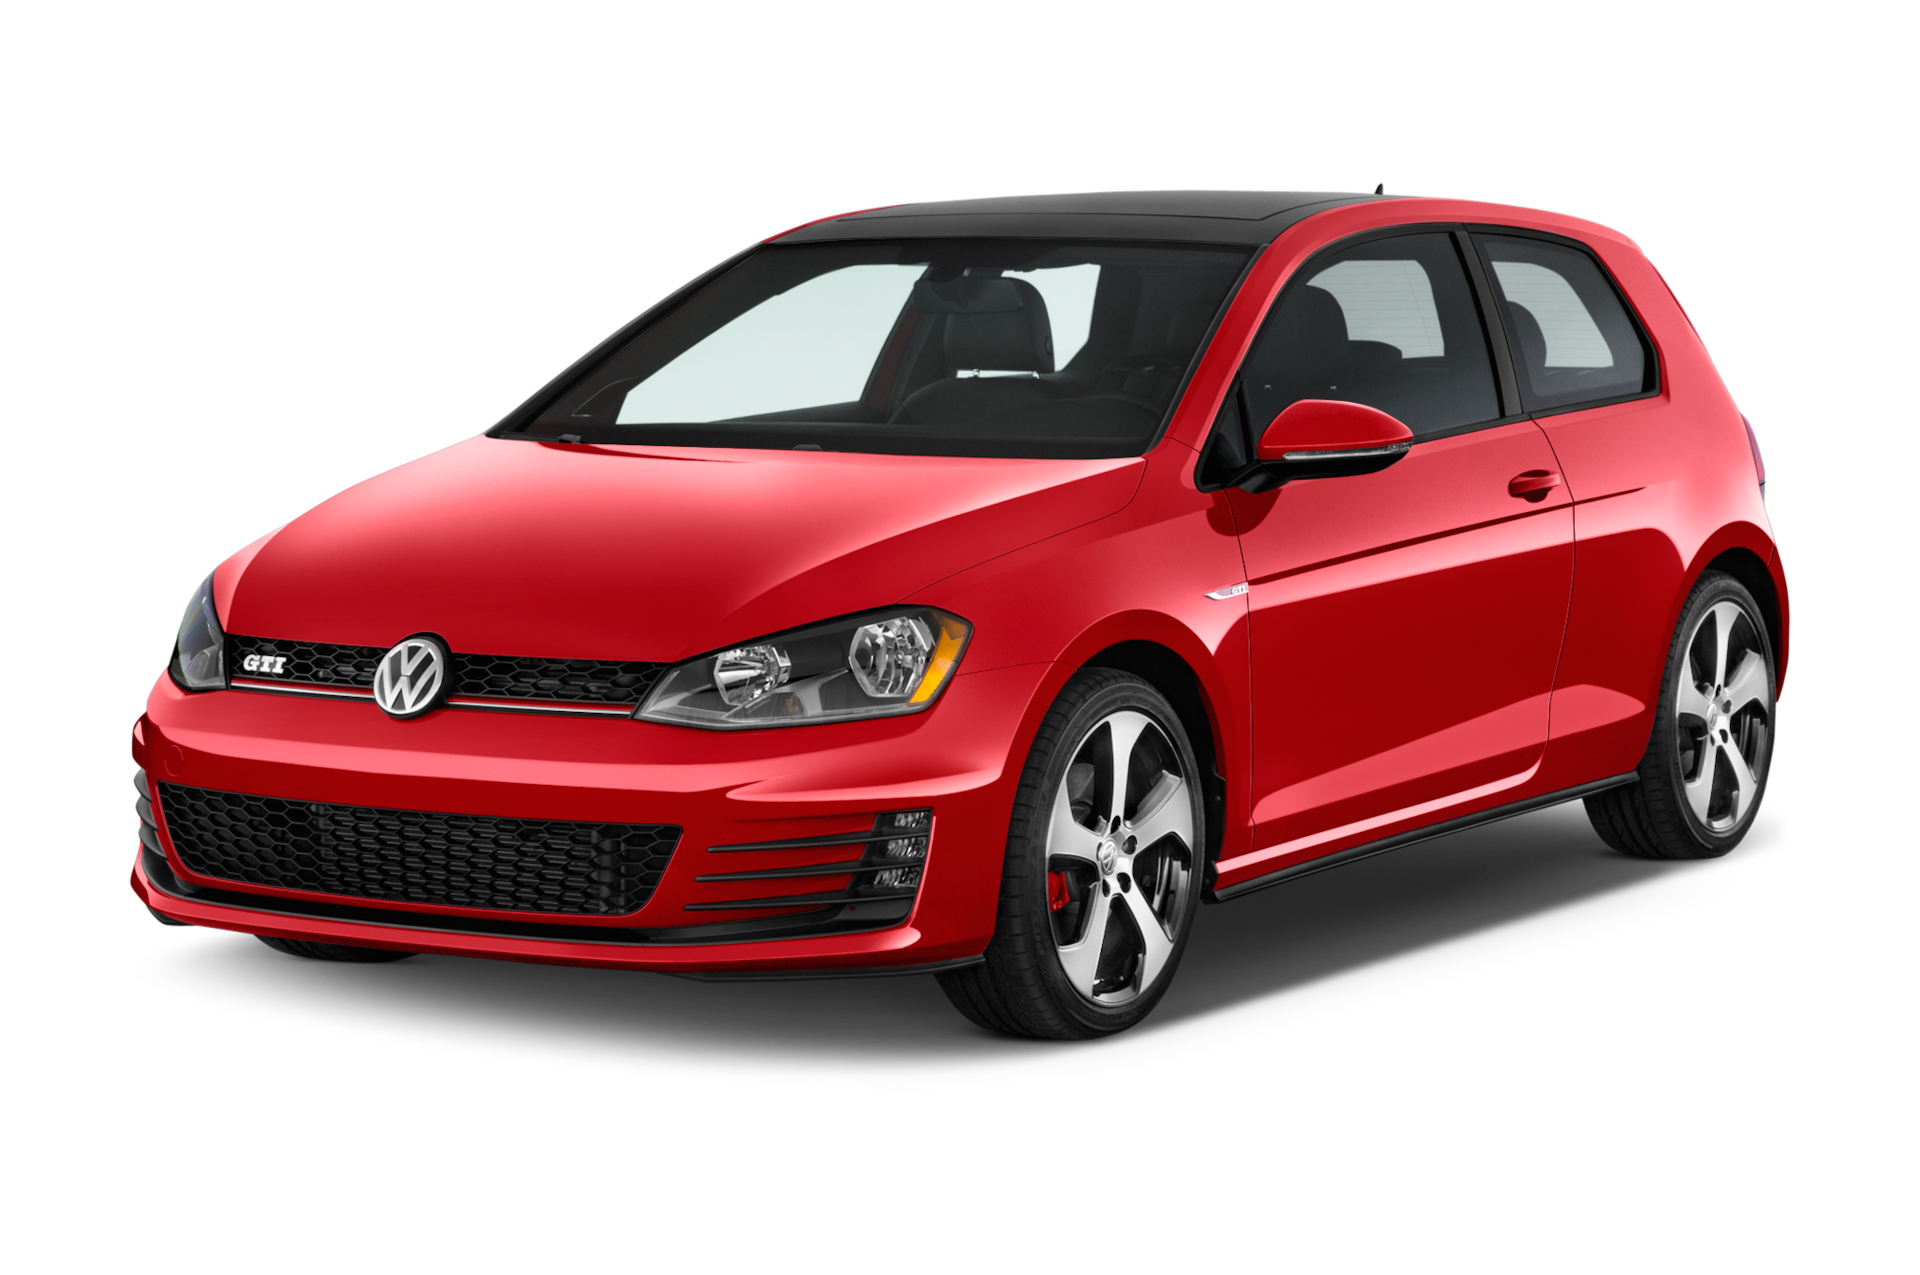 2016 Volkswagen GTI Prices, Reviews, and Photos - MotorTrend